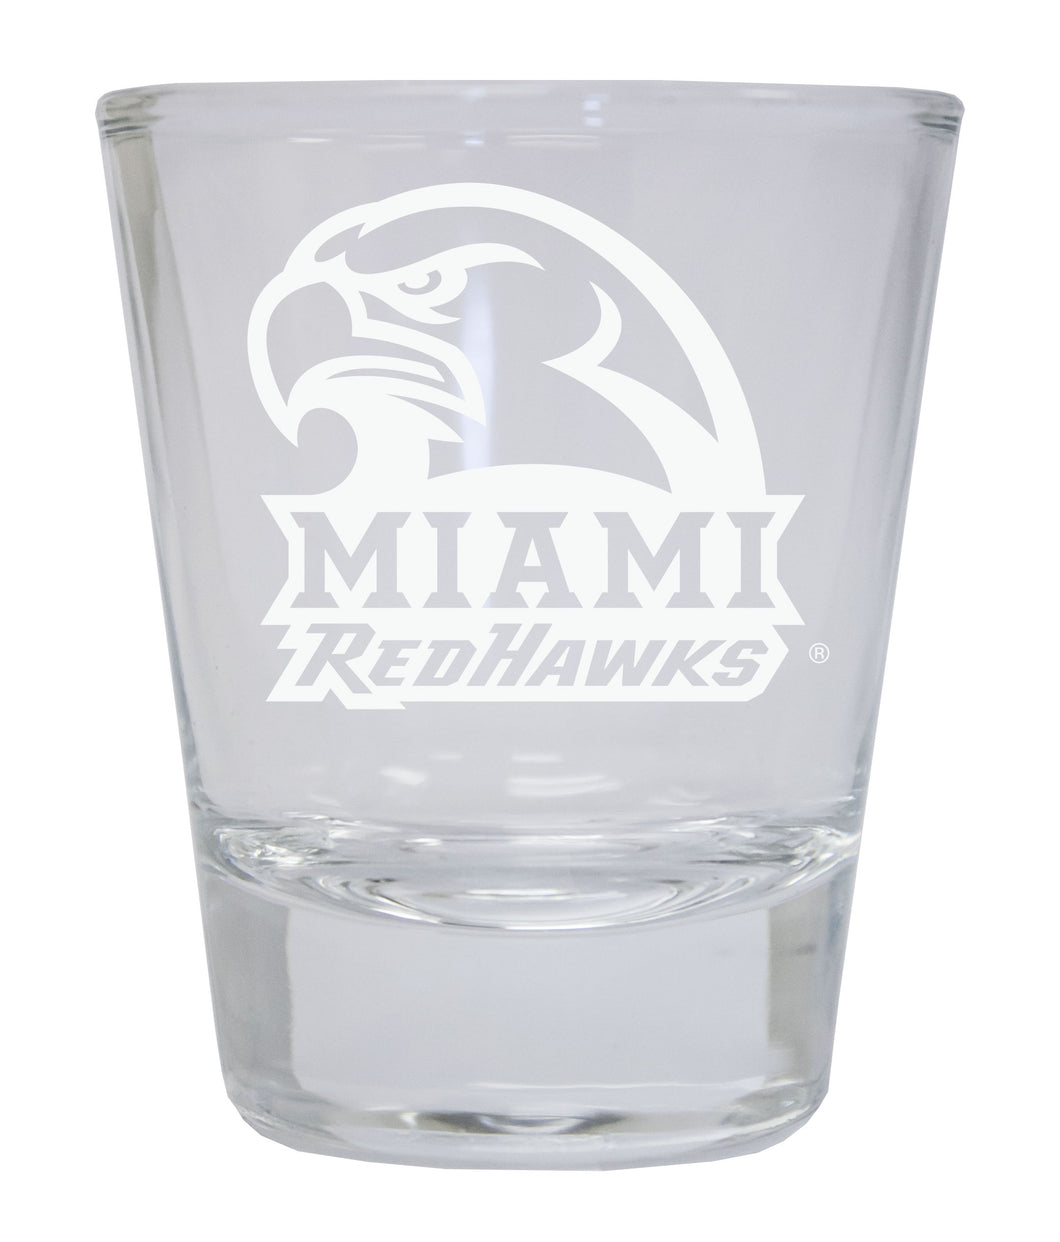 Miami of Ohio Etched Round Shot Glass Officially Licensed Collegiate Product